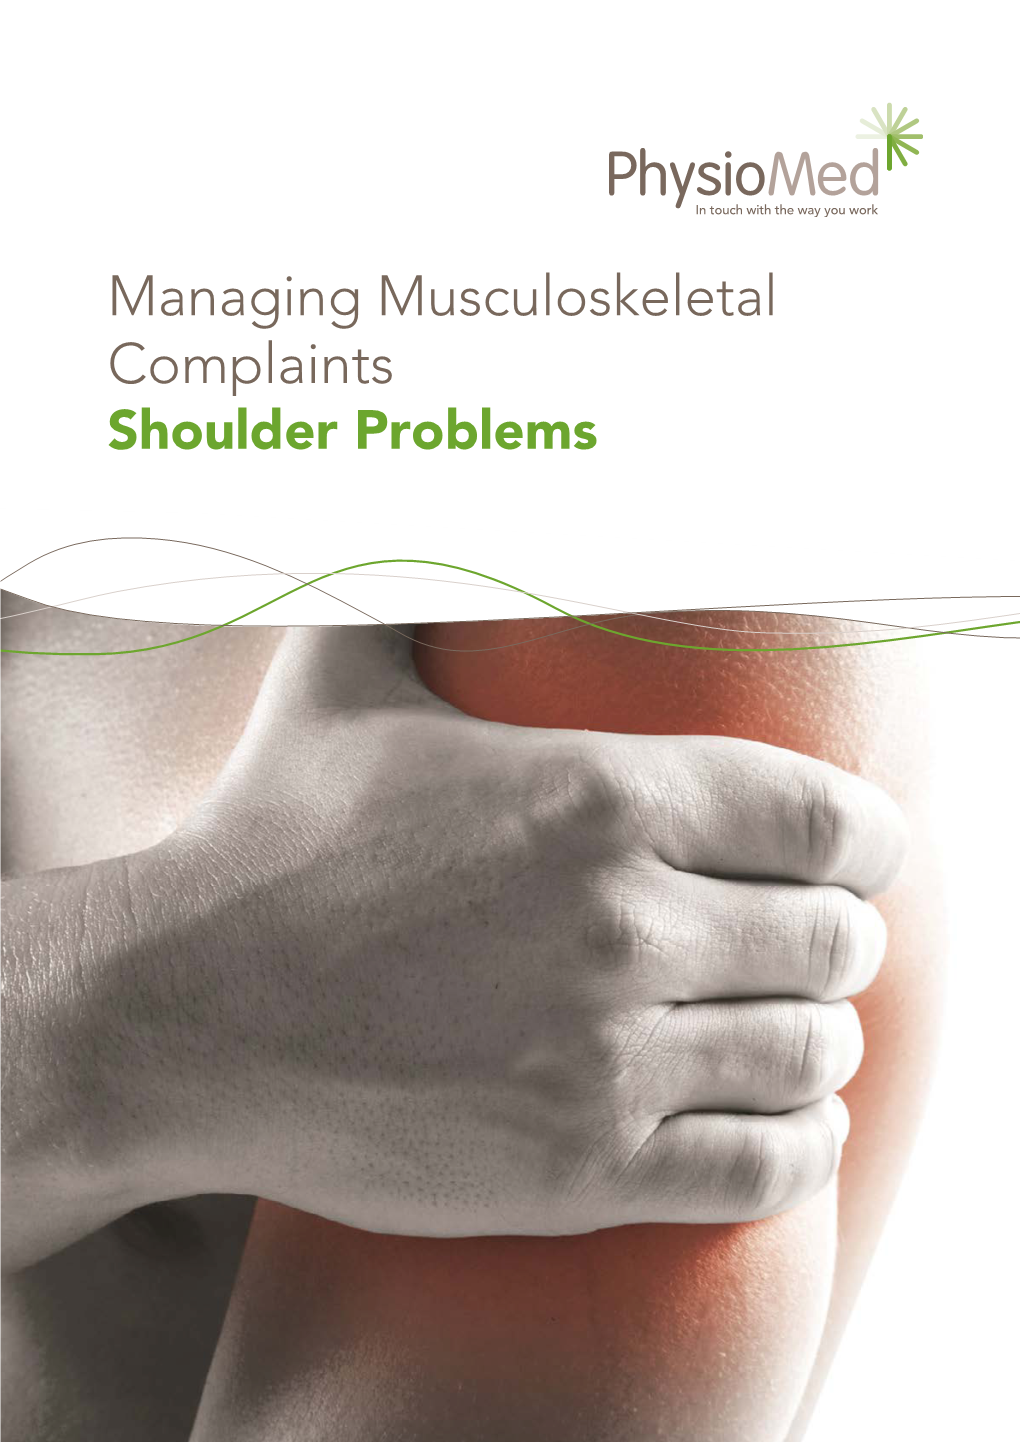 Managing Musculoskeletal Complaints Shoulder Problems Physio Med